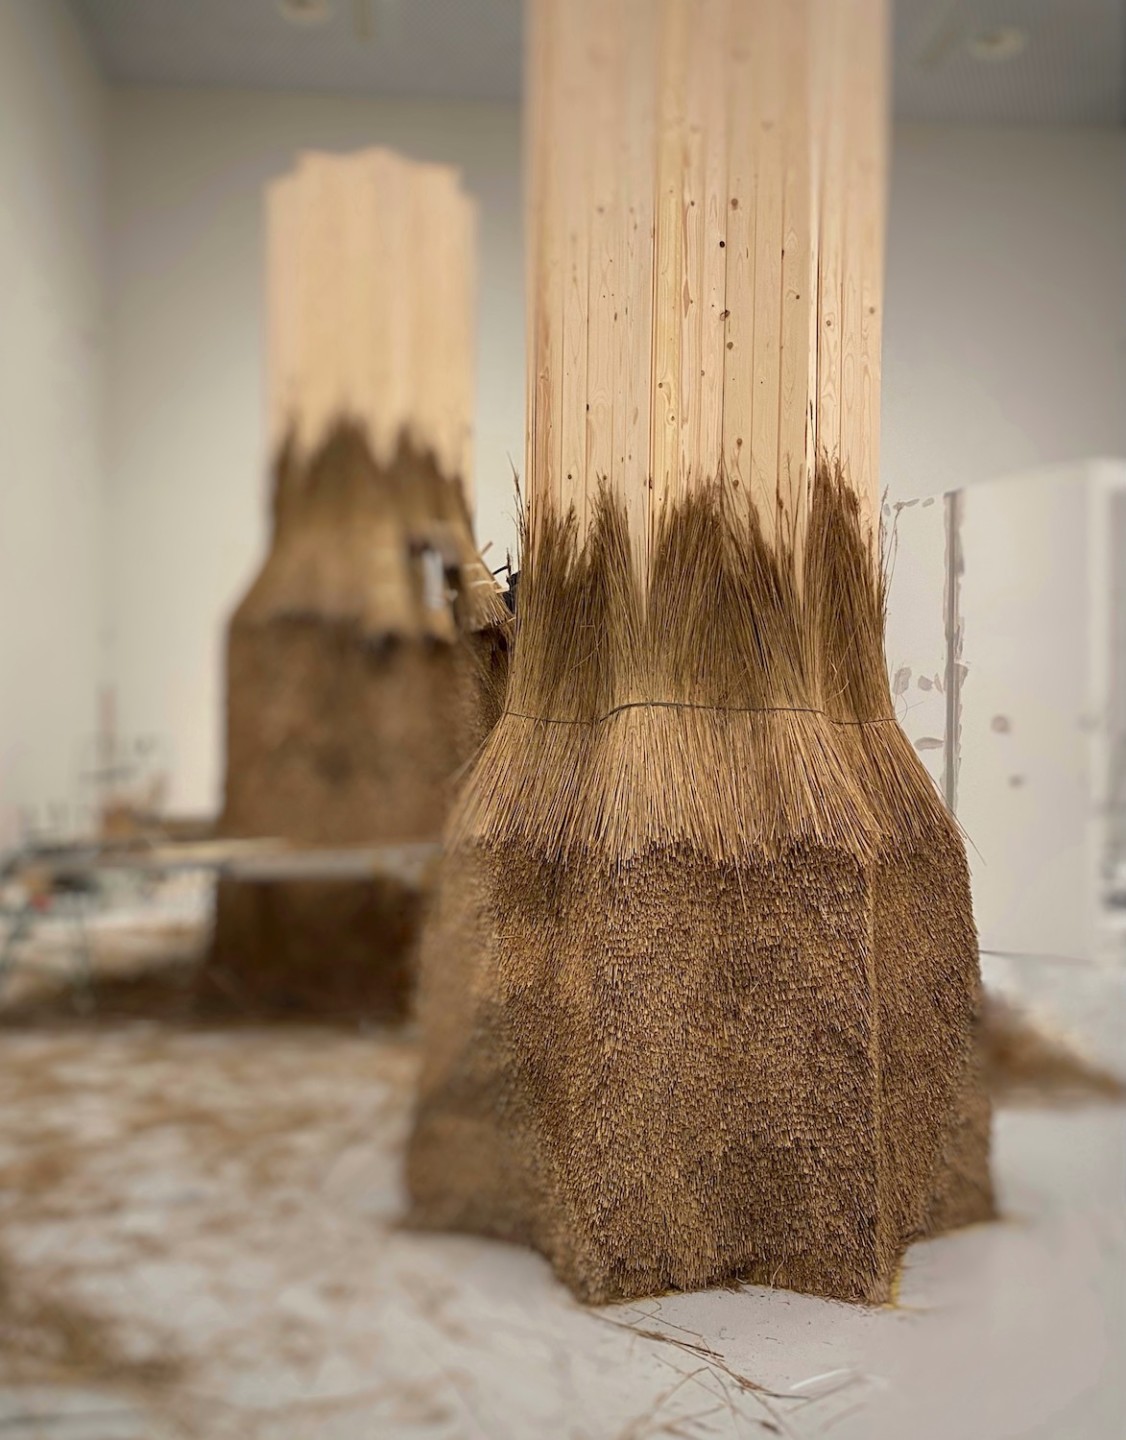 Photo of two straw towers in the making